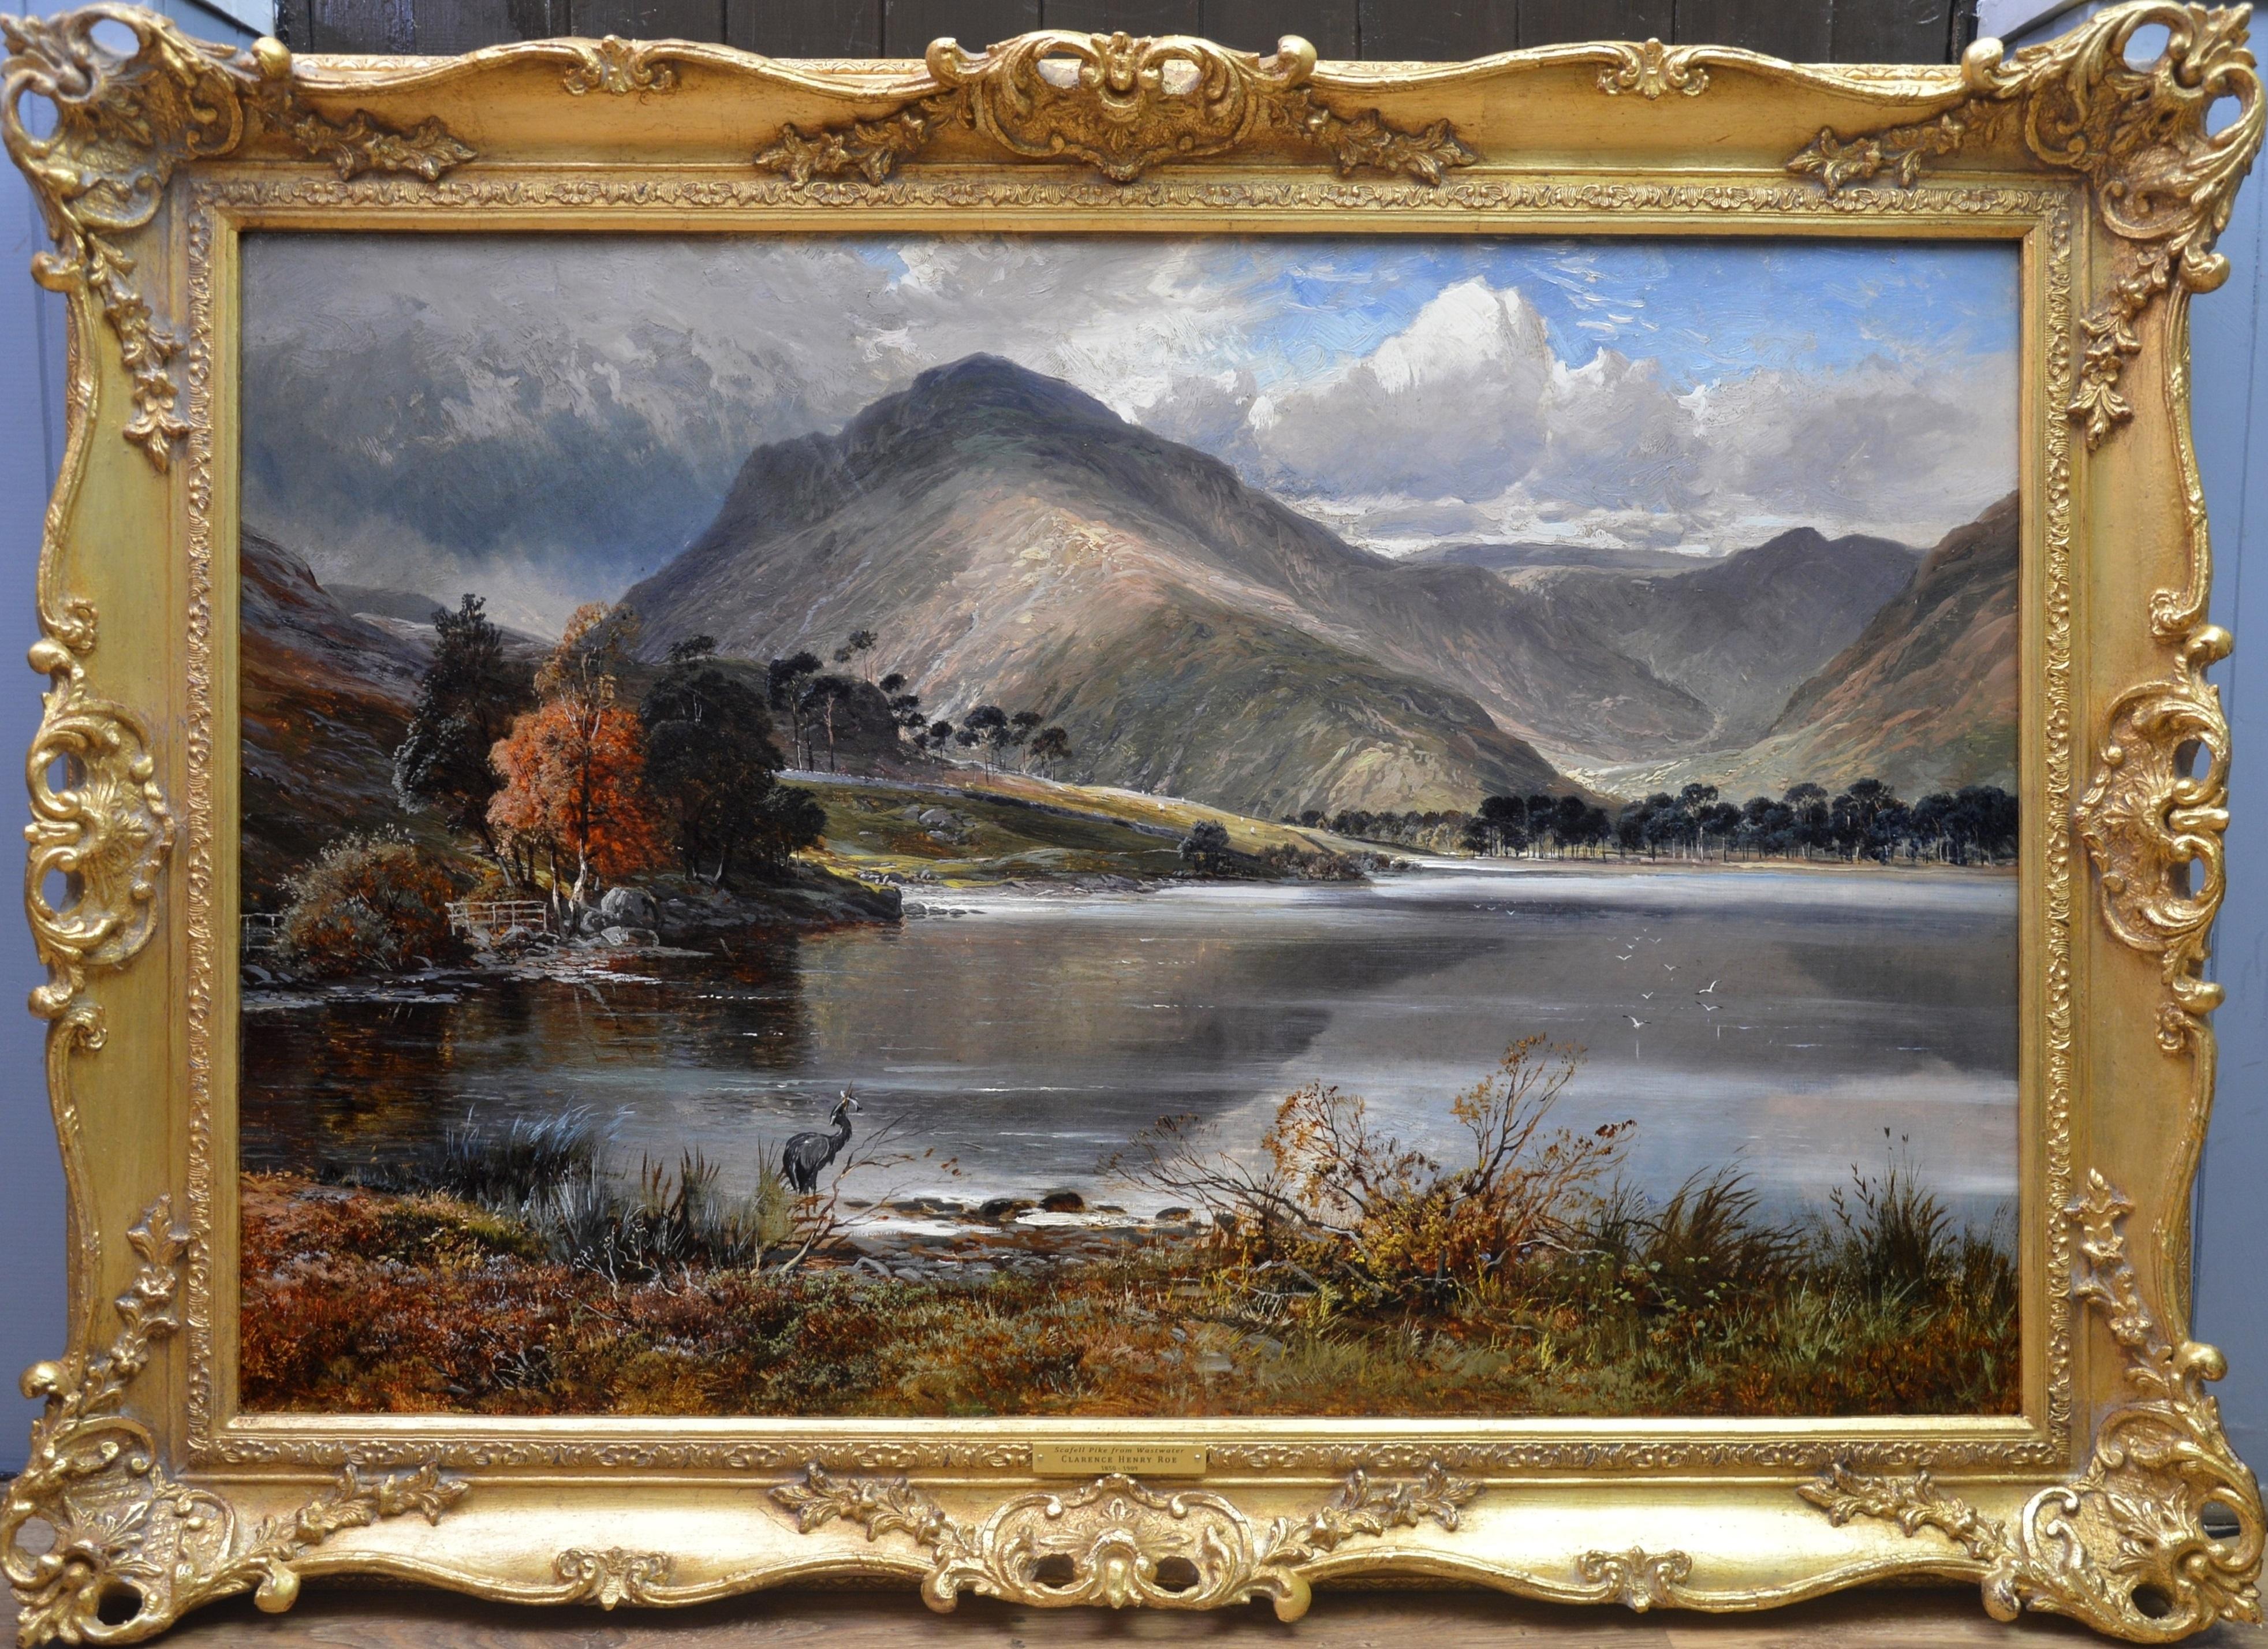 Clarence Roe Animal Painting - Scafell Pike from Wastwater - 19th Century English Landscape Oil Painting